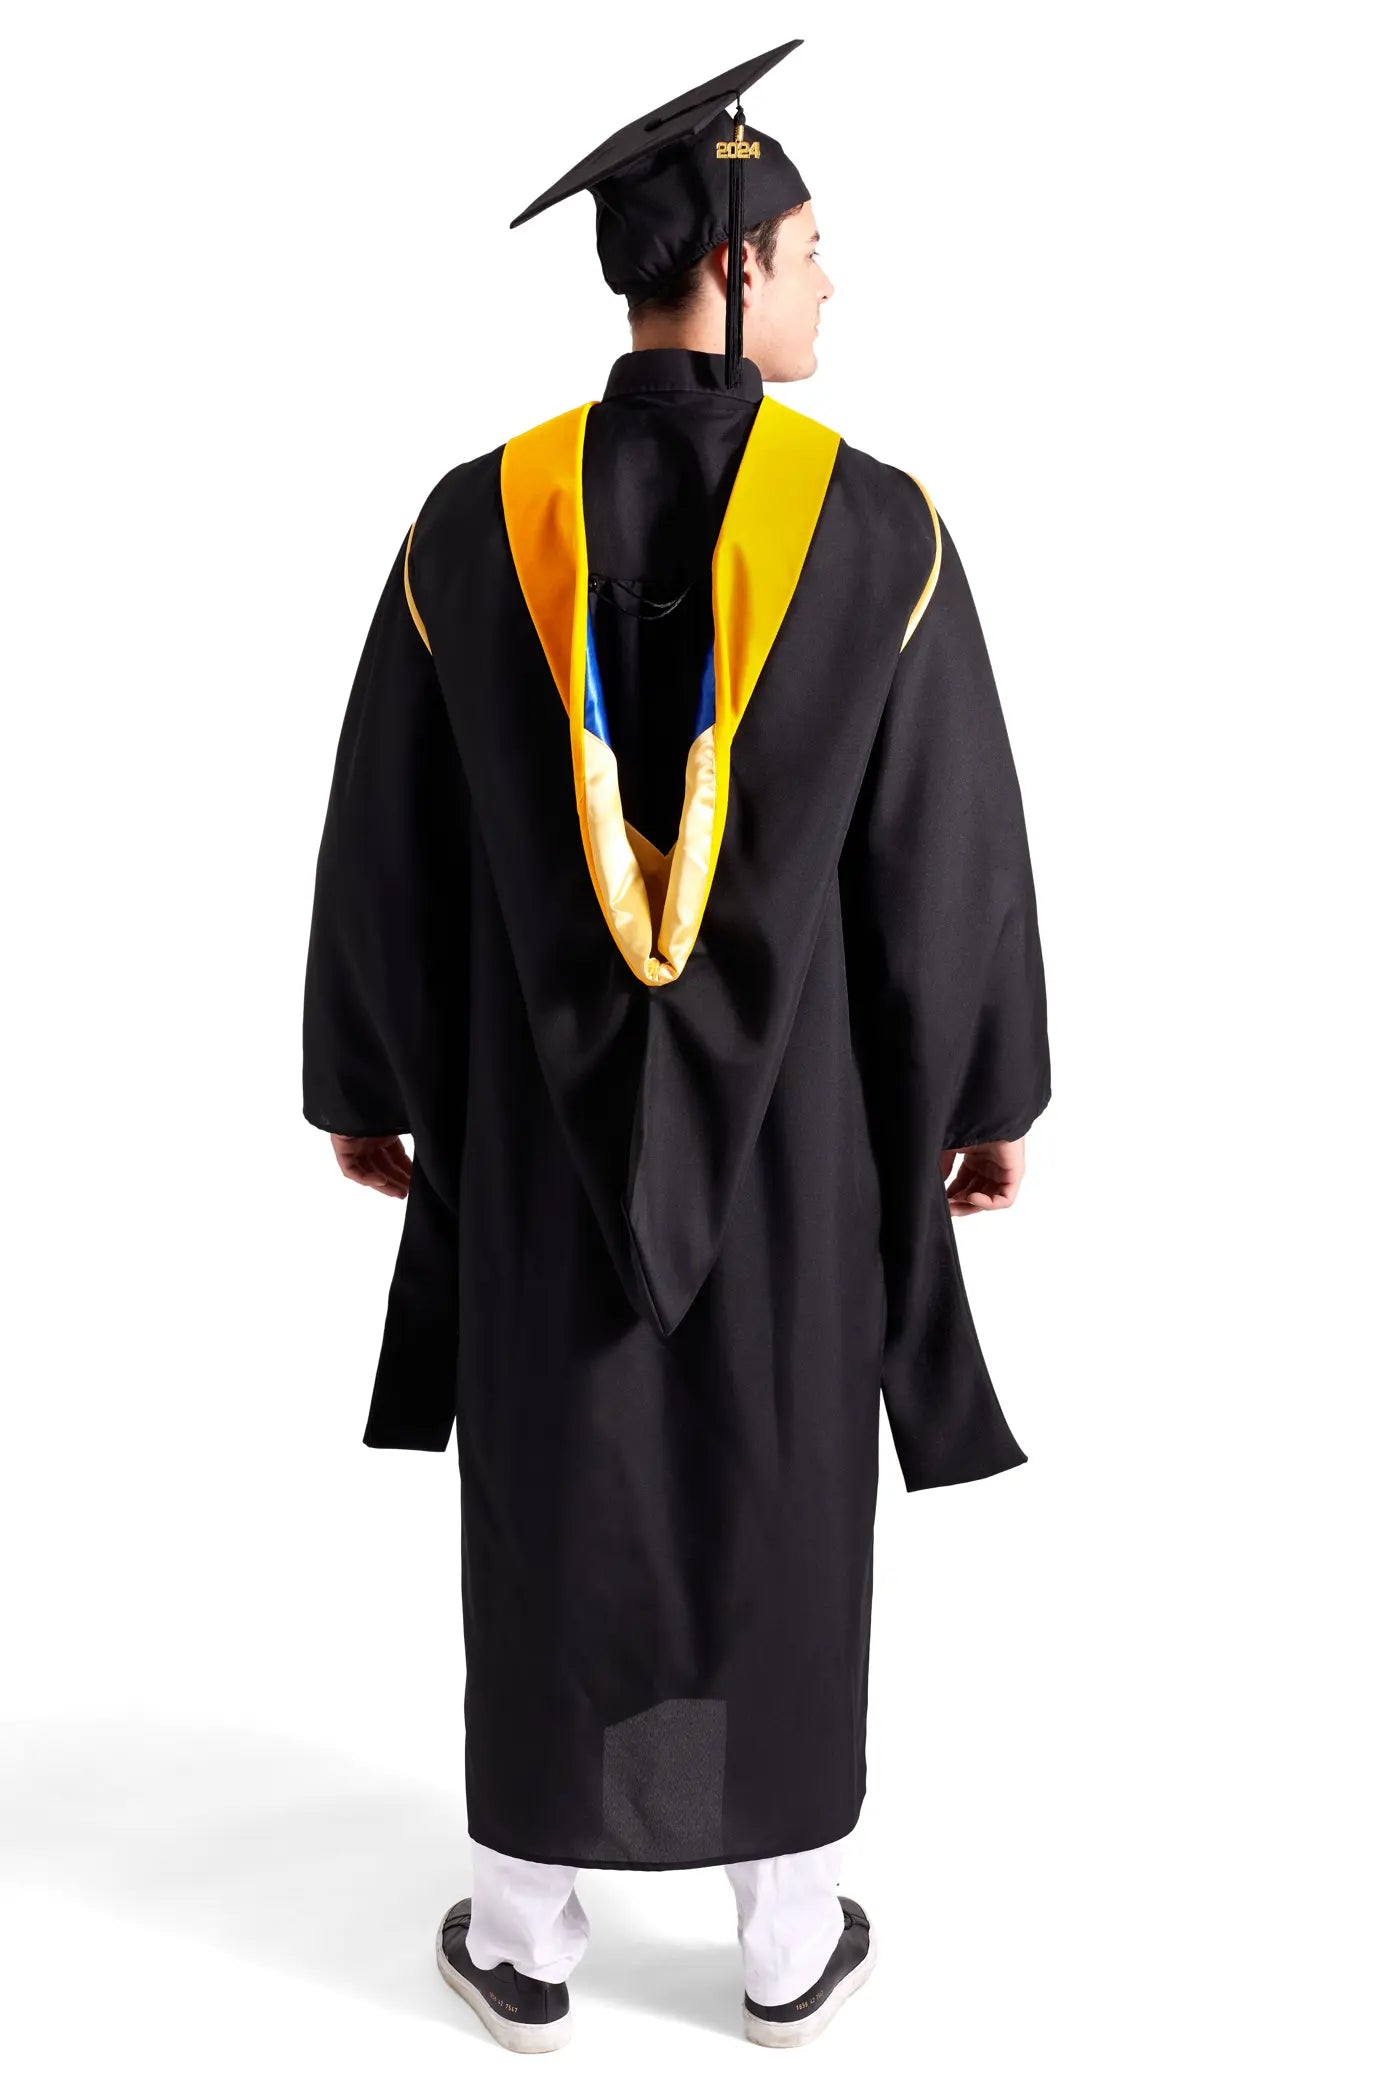 HAPPY TASSEL | UC Riverside Master's Regalia Set, include master's gown with pockets, mortarboard cap, golden yellow hood, and tassel with year charm. | Biomedical Sciences & College of Natural & Agricultural Sciences Degrees